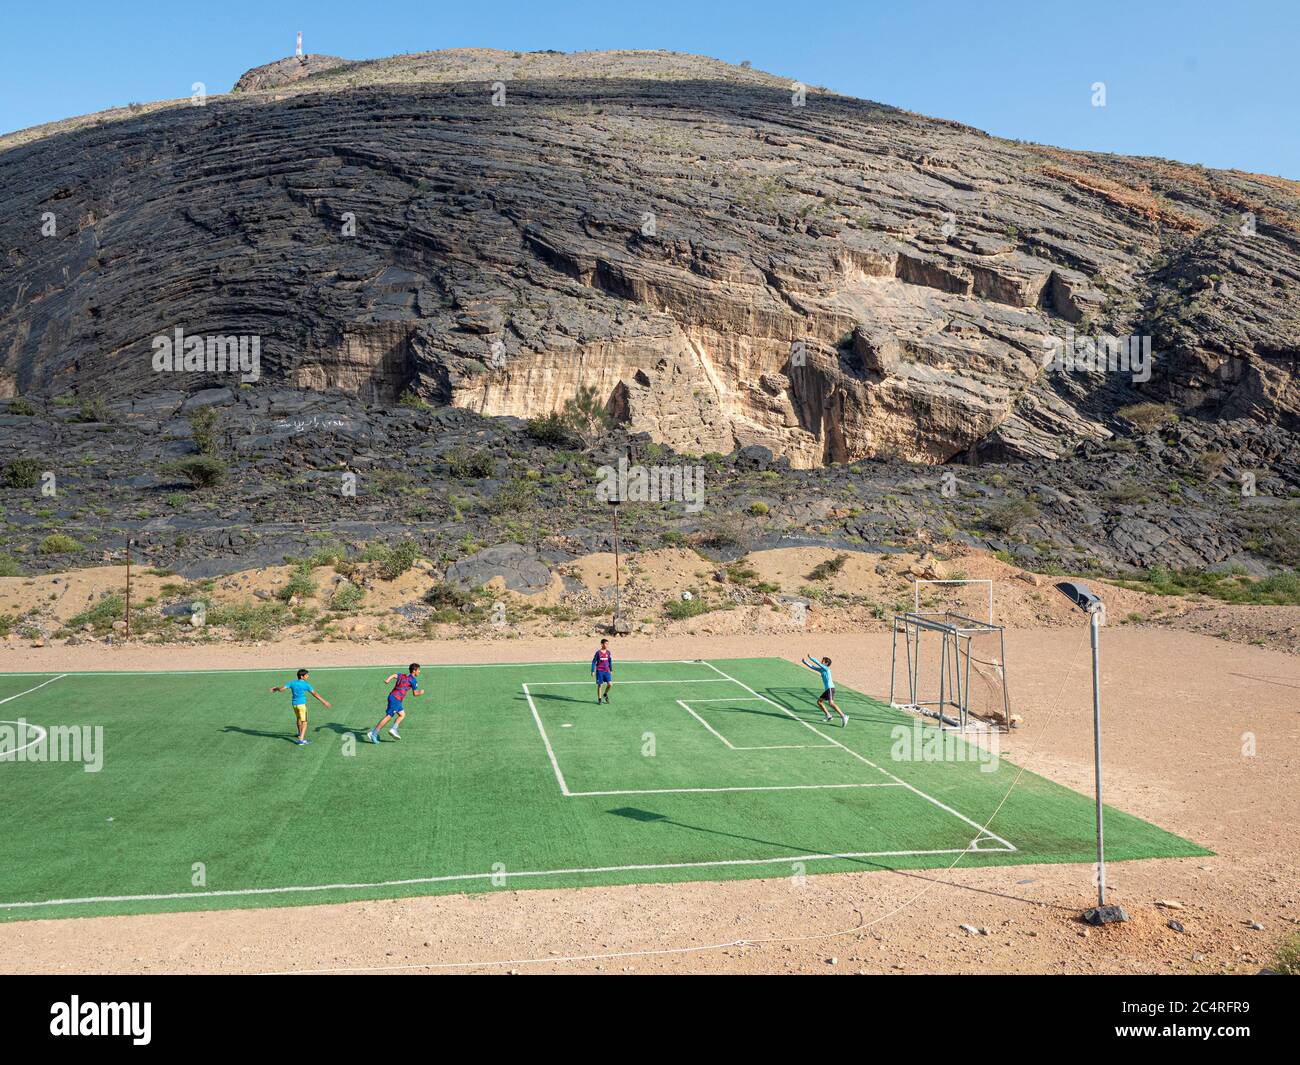 Kids playing soccer near Bilad Sayt, a mountain village located in the Al Hajar Mountains, Sultanate of Oman. Stock Photo